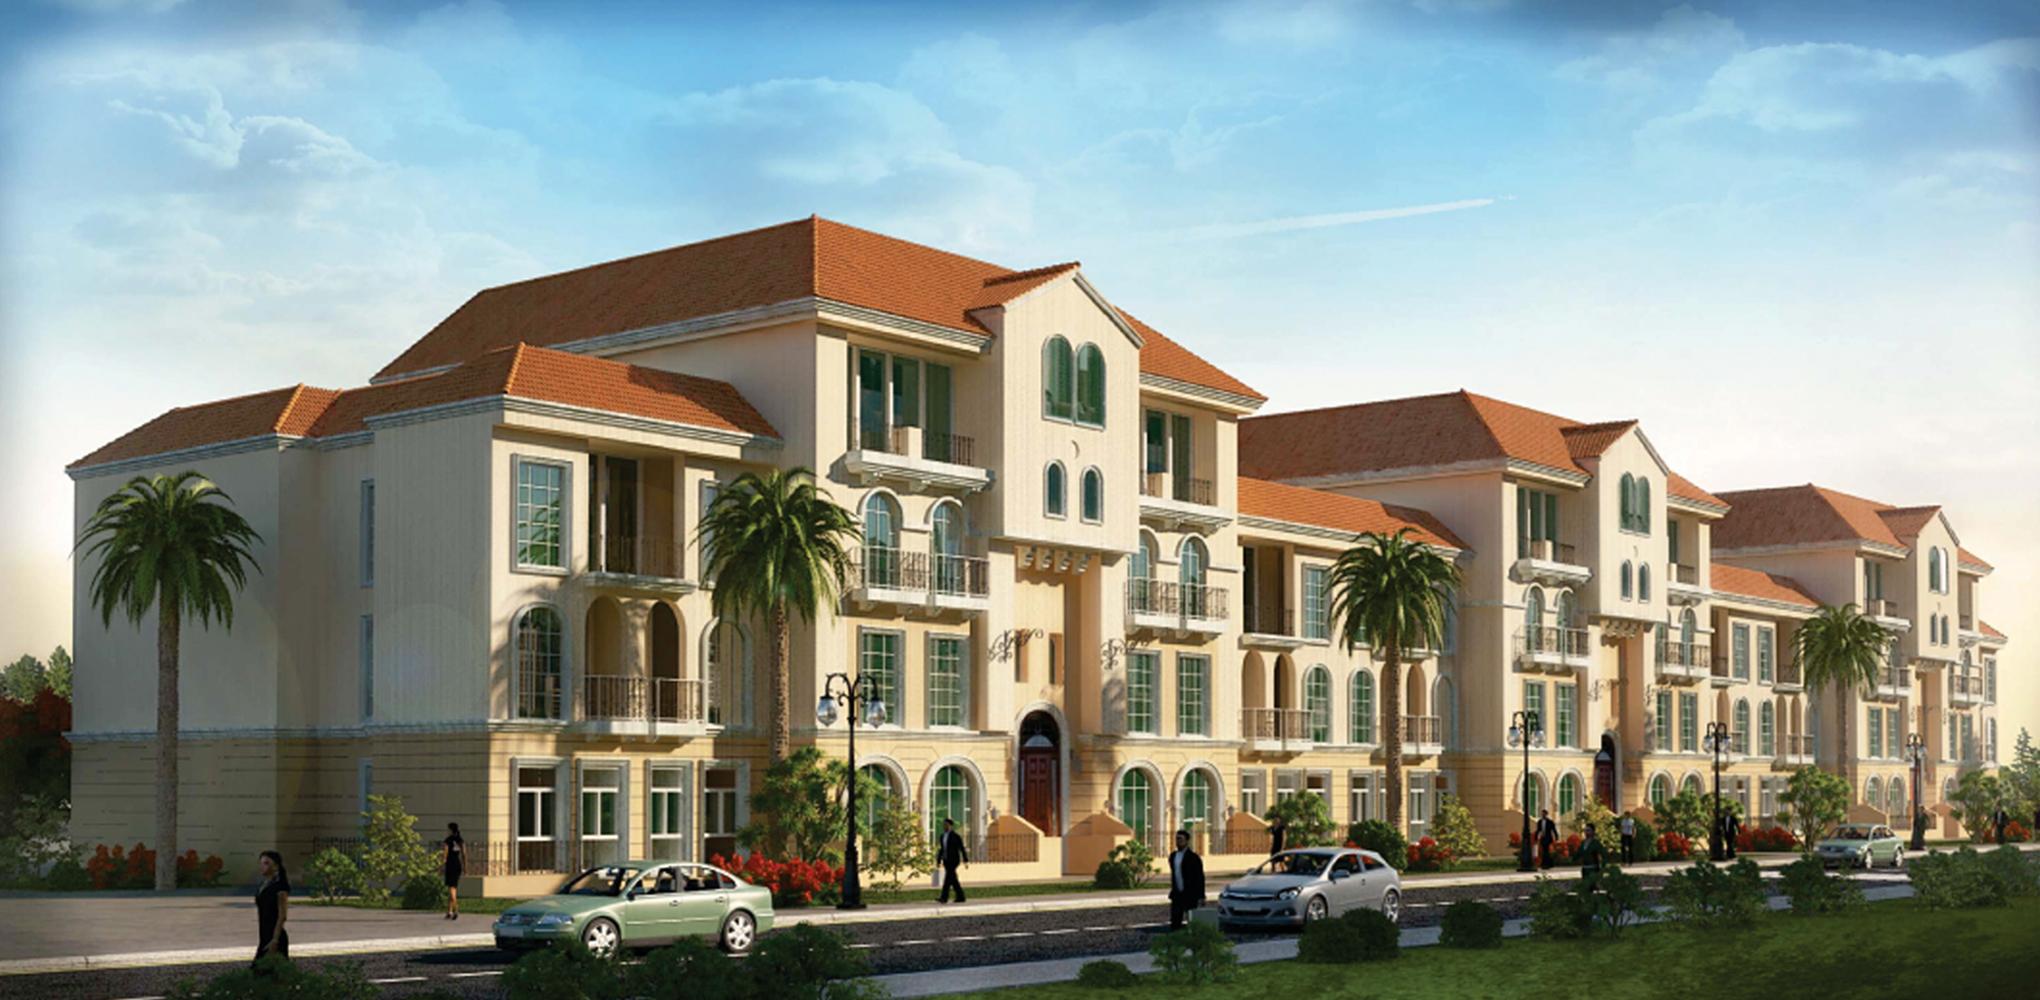 AMSC is awarded a Commercial Villas complex in Abu Dhabi for a total contract value of 61,200,000.00 AED